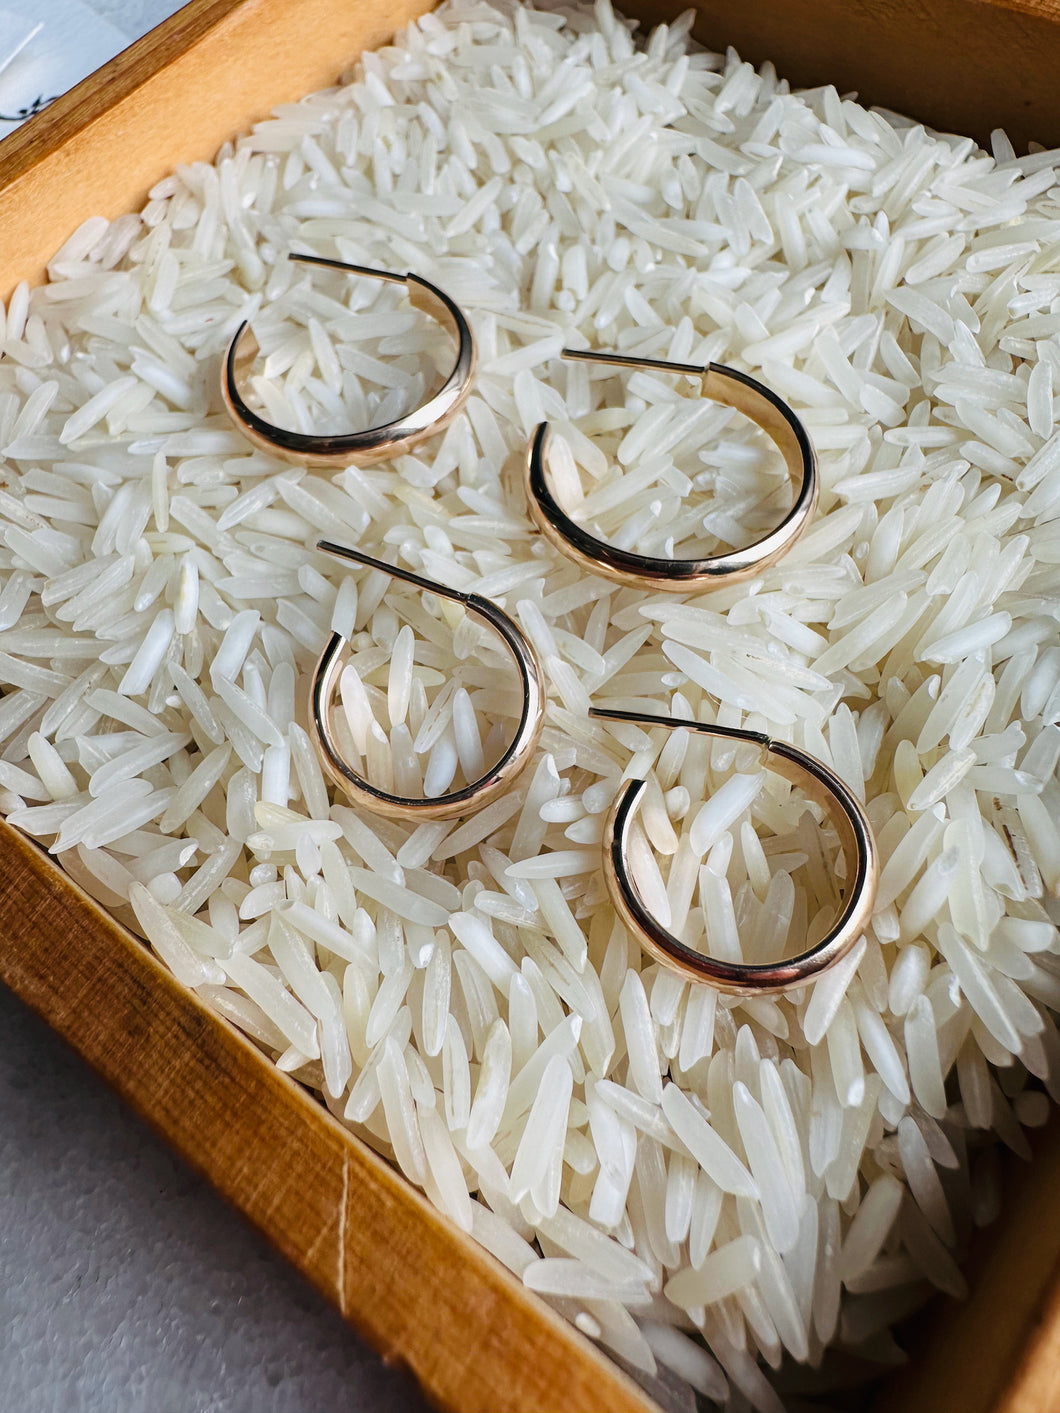 14k Gold Filled Classic 90s Hoops shown in both sizes in a bed of white rice